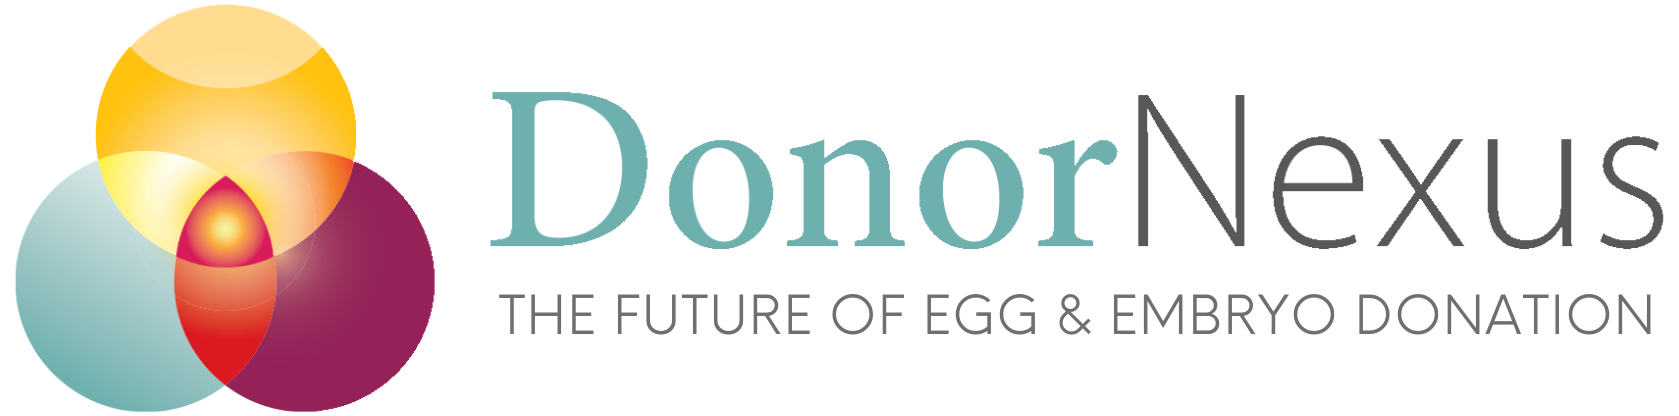 Donor Nexus Egg Bank and Egg Donation Agency in Newport Beach, Orange County, Southern California